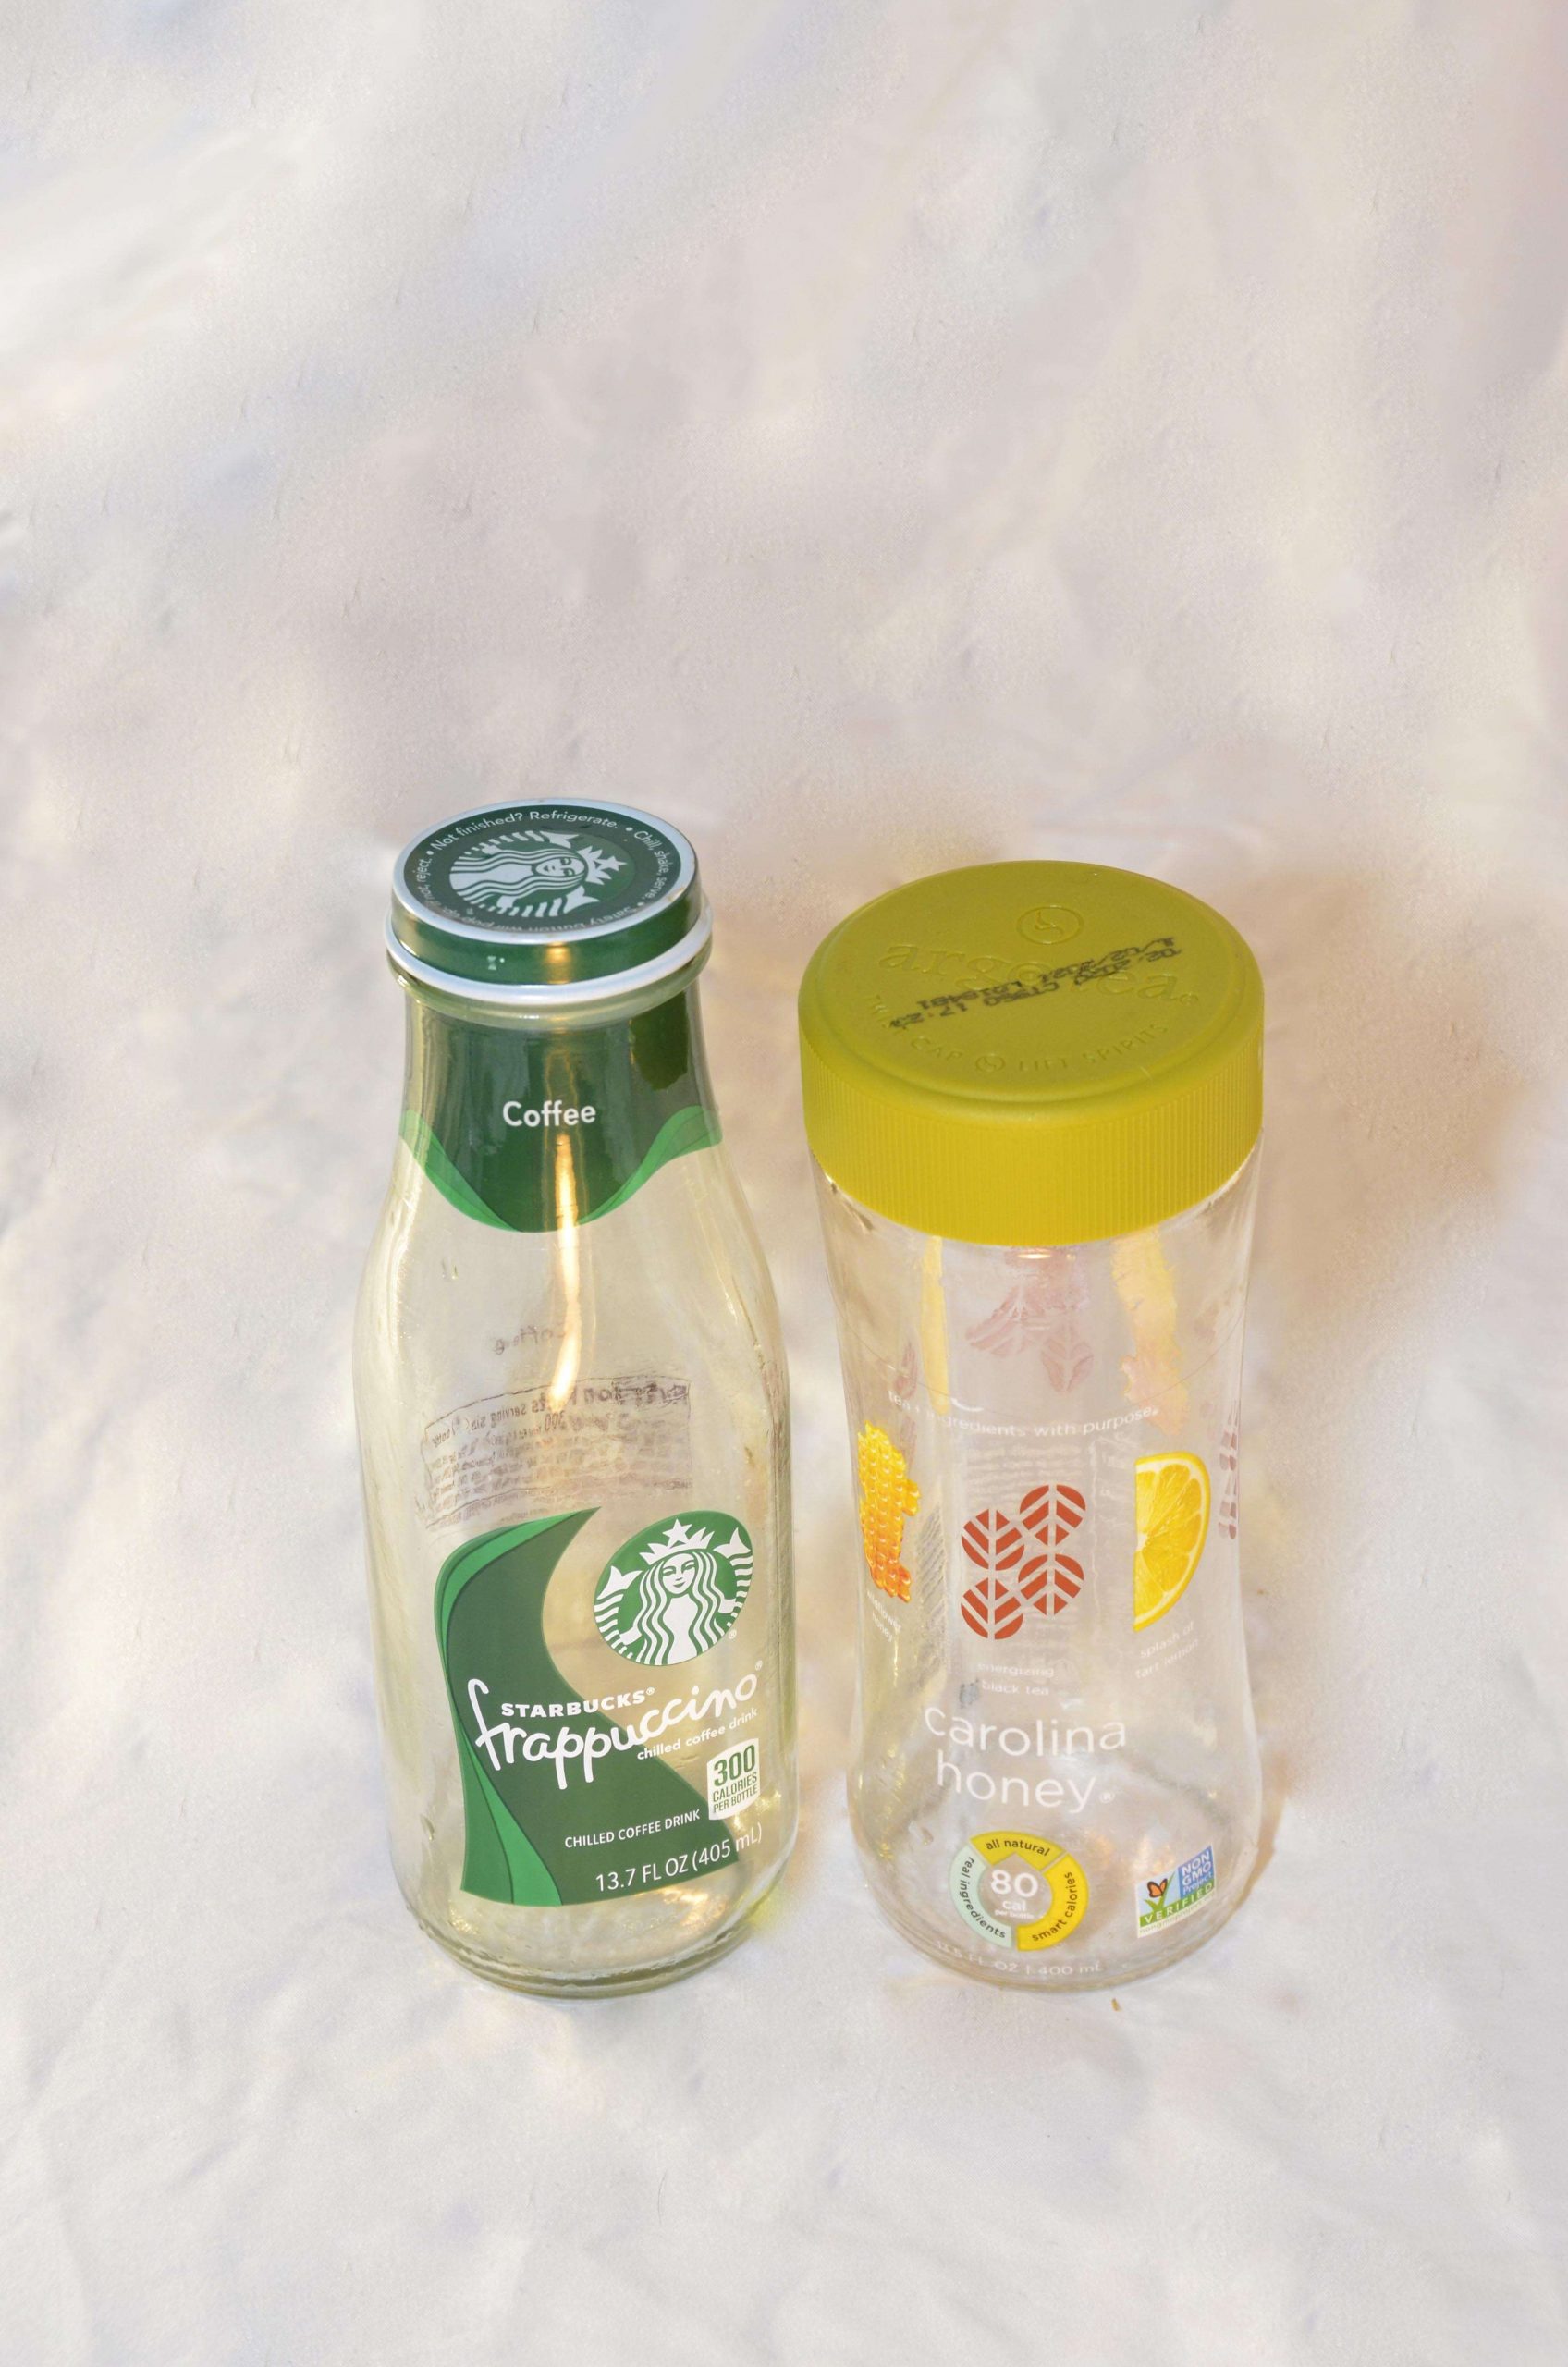 Small bottles from caffeinated cold beverages, with large openings and lids that tightly reseal become temporary but effective handwarmers after you recycle the original contents. You might need two of them, since many hold less than 14 ounces.
